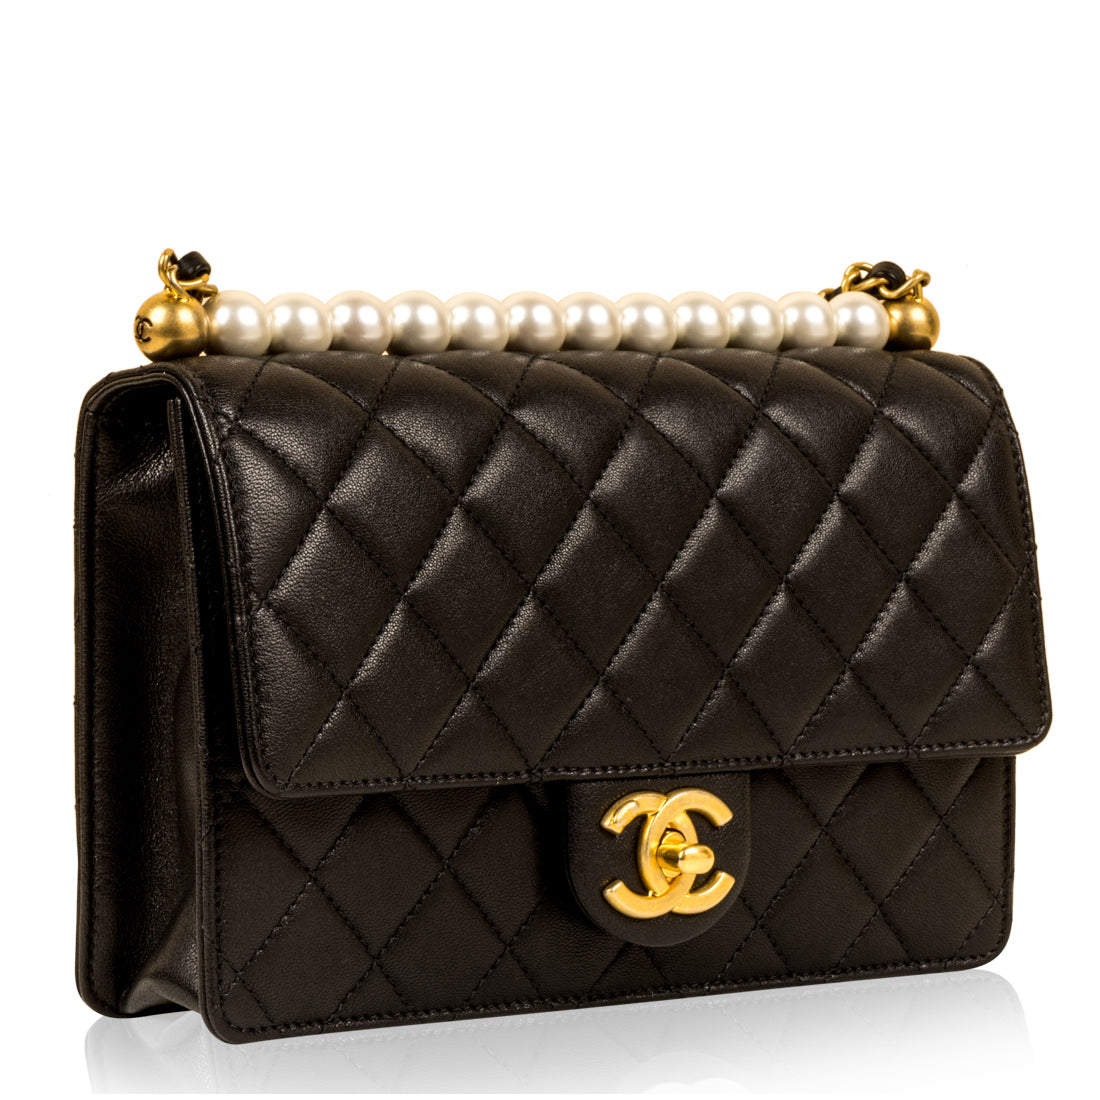 Chanel - Pearl Flap Bag - Small - Pre-Loved